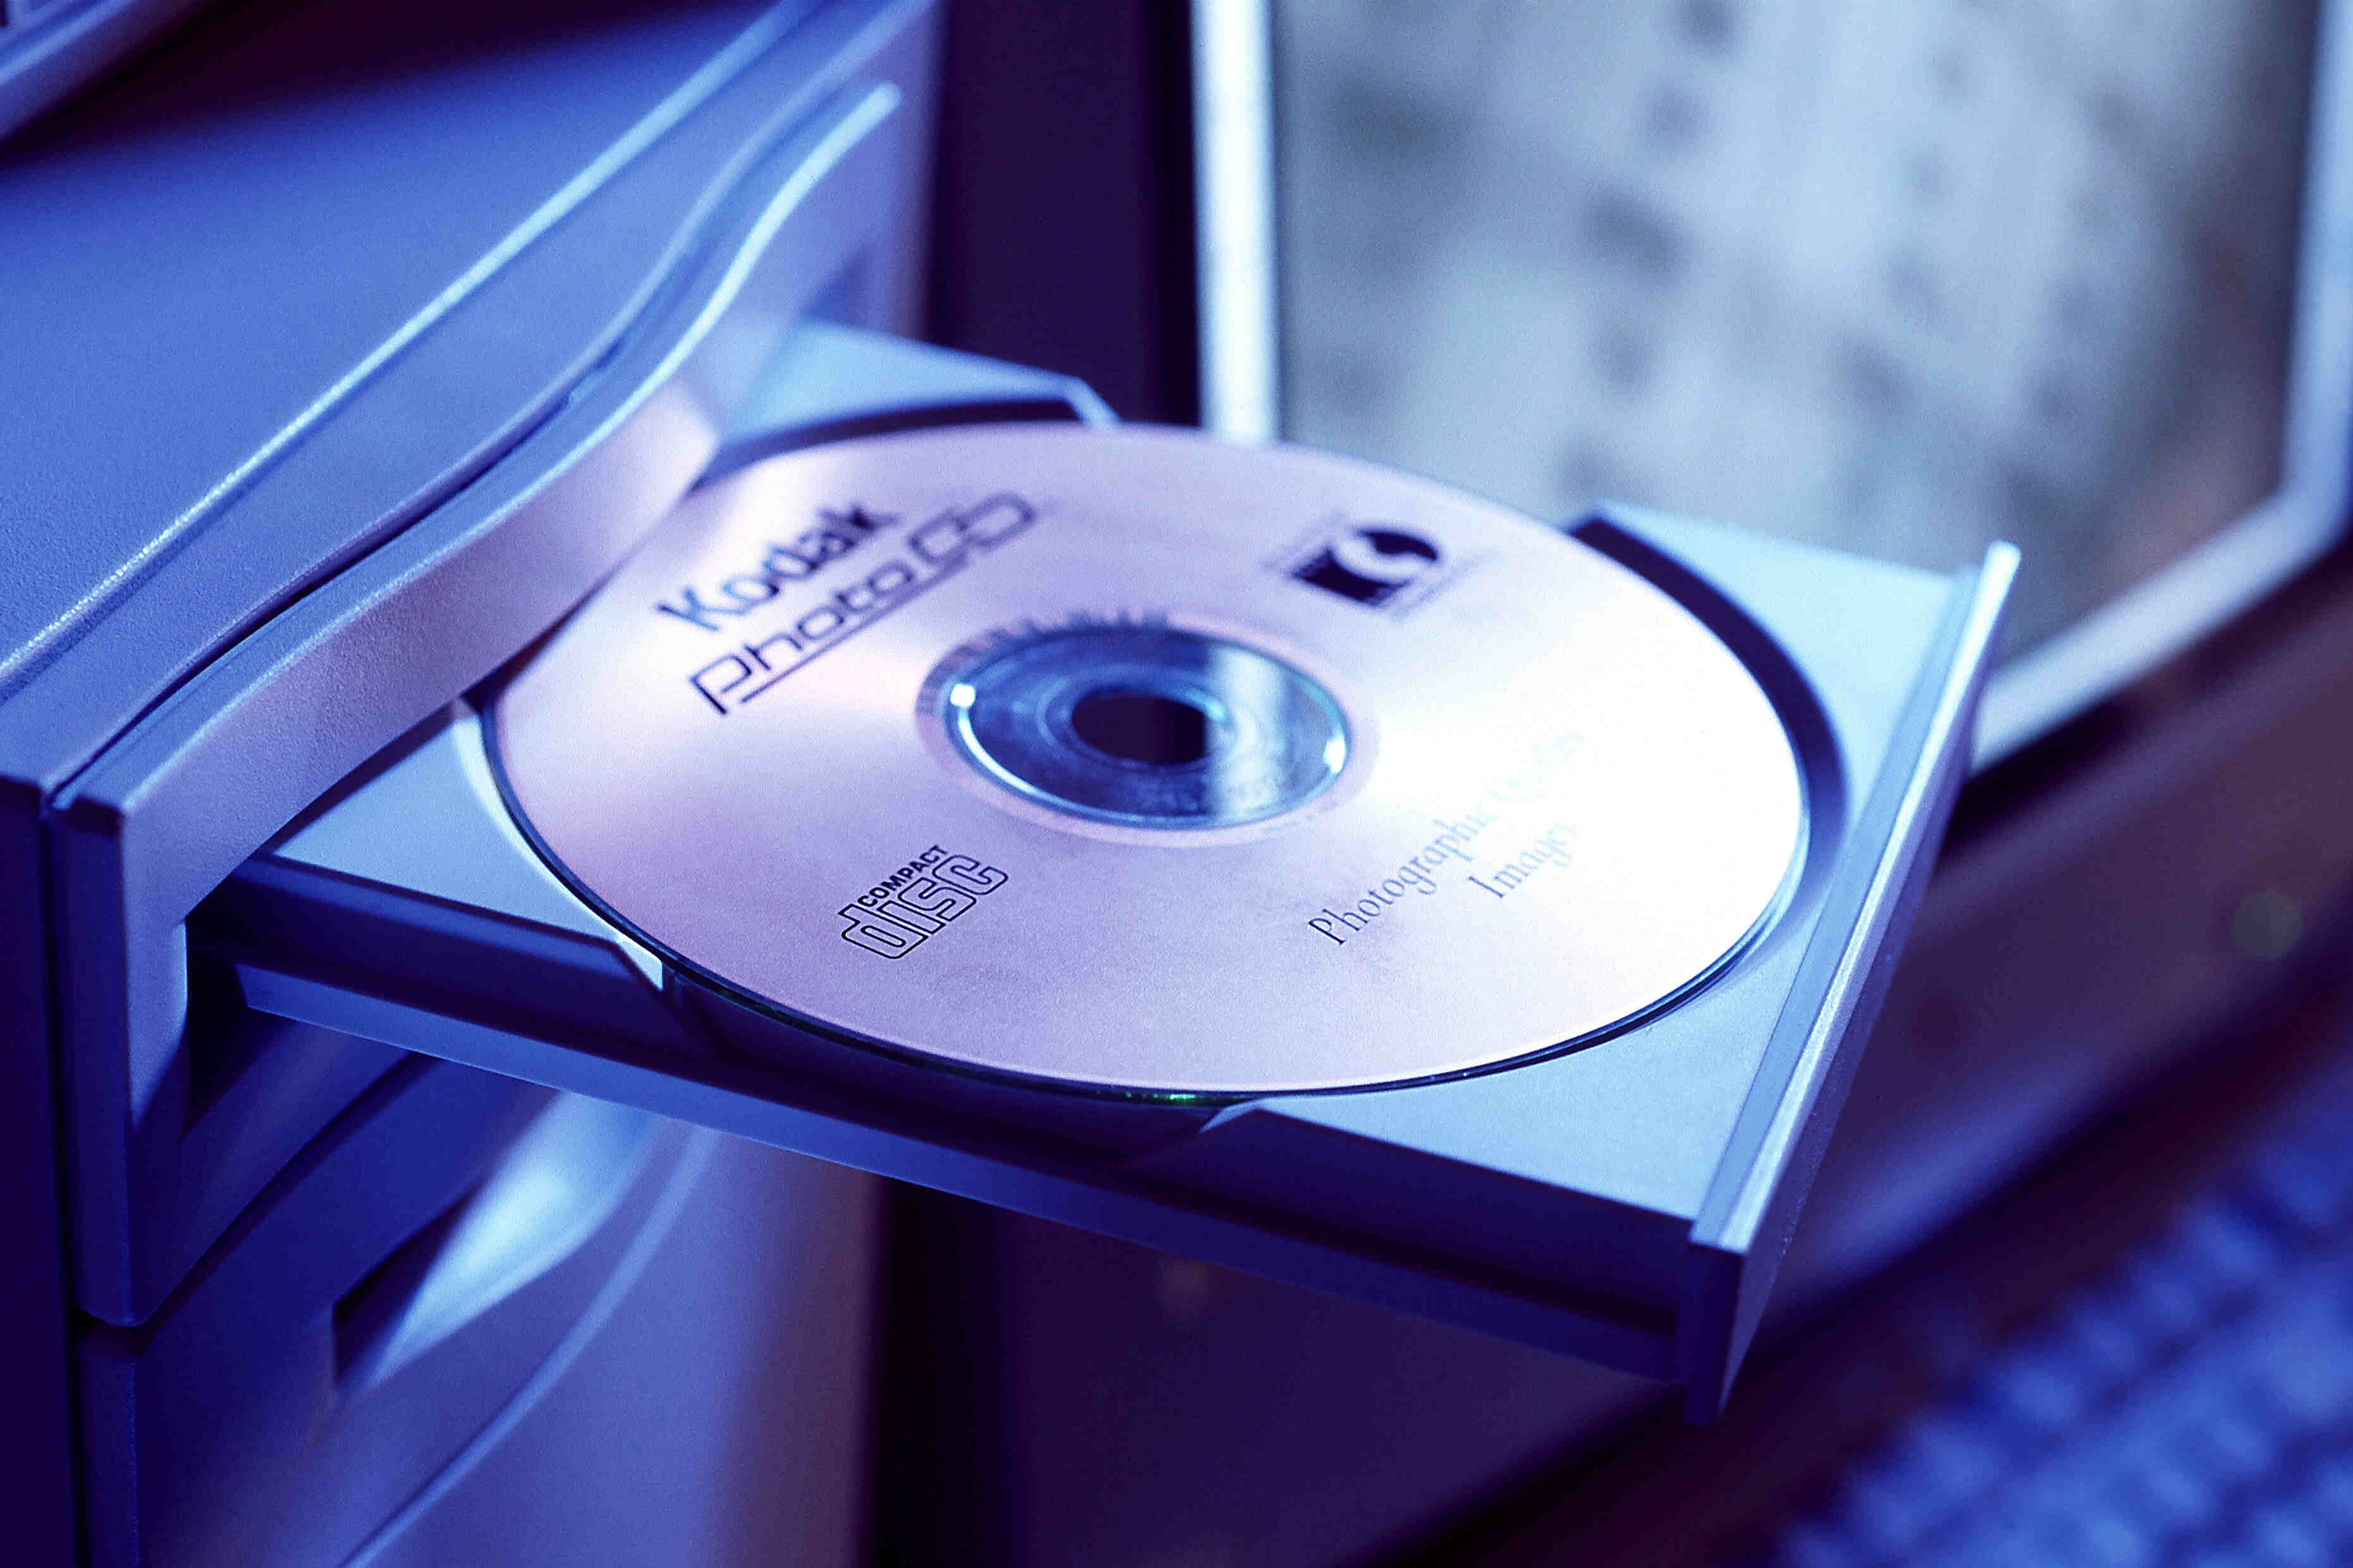 How To Download Music From A CD To Computer